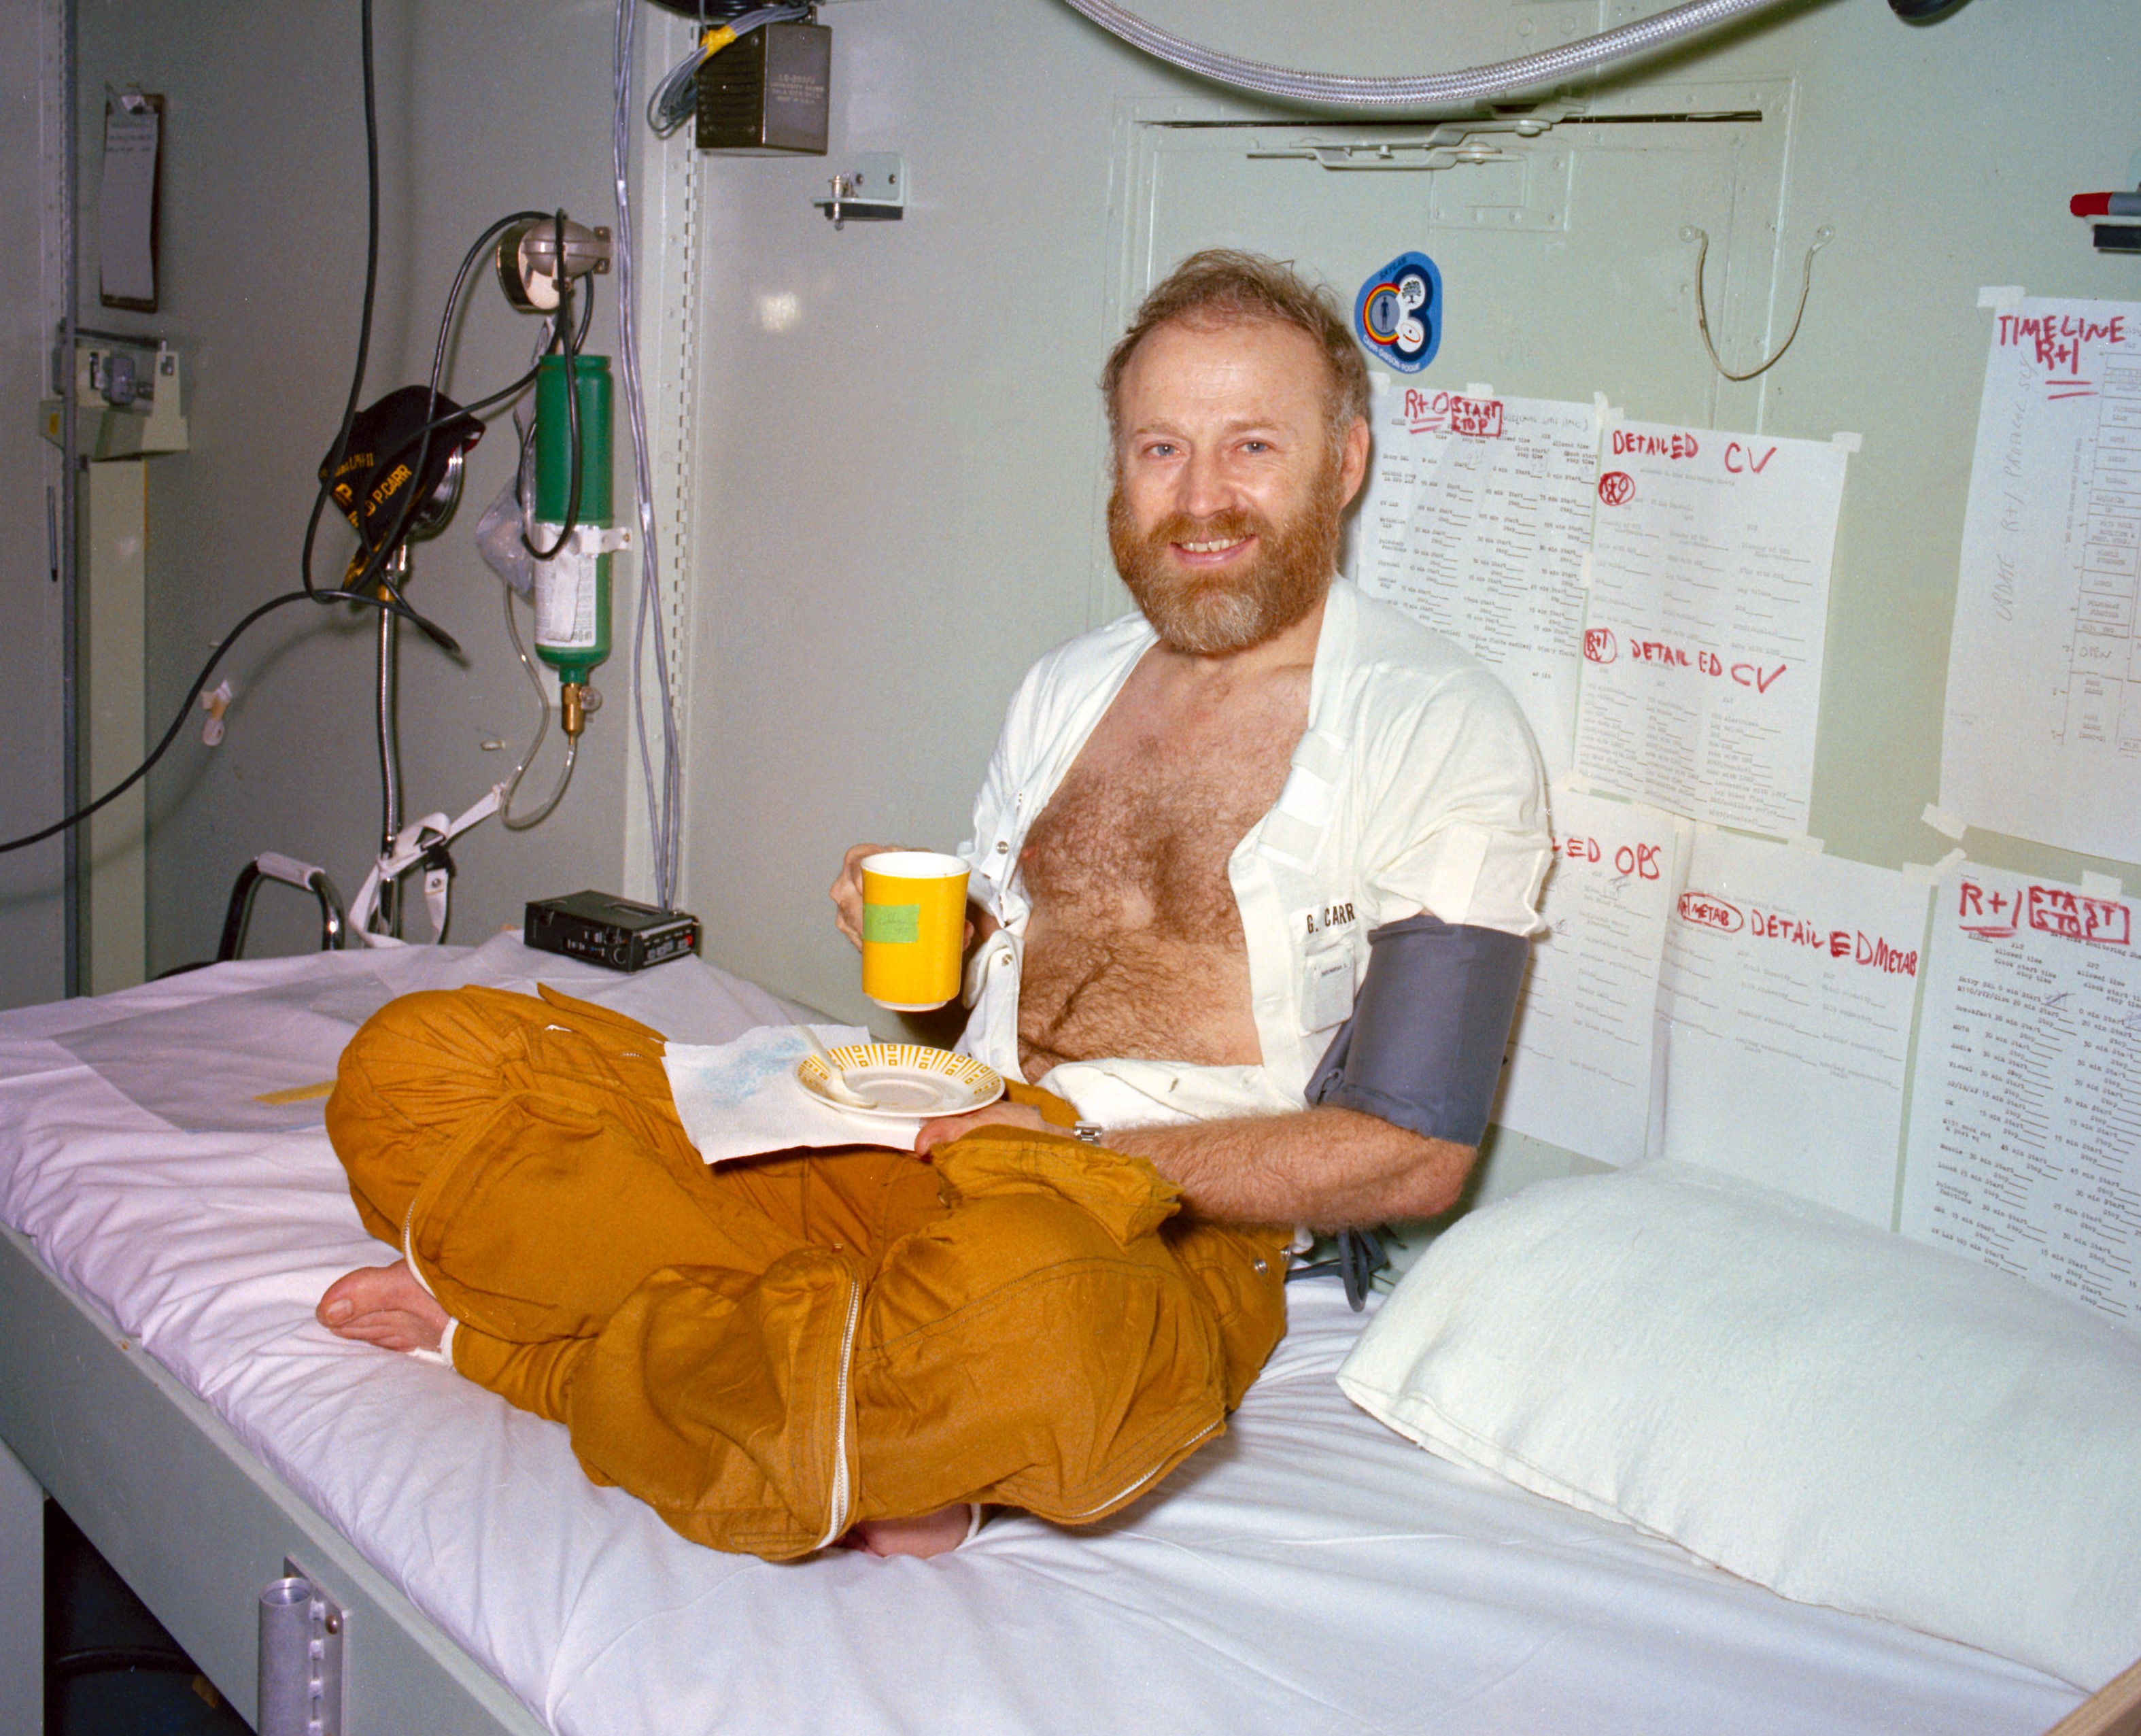 Skylab 4 Commander Gerald P. Carr enjoys a cup of coffee during medical testing aboard the U.S.S. New Orleans